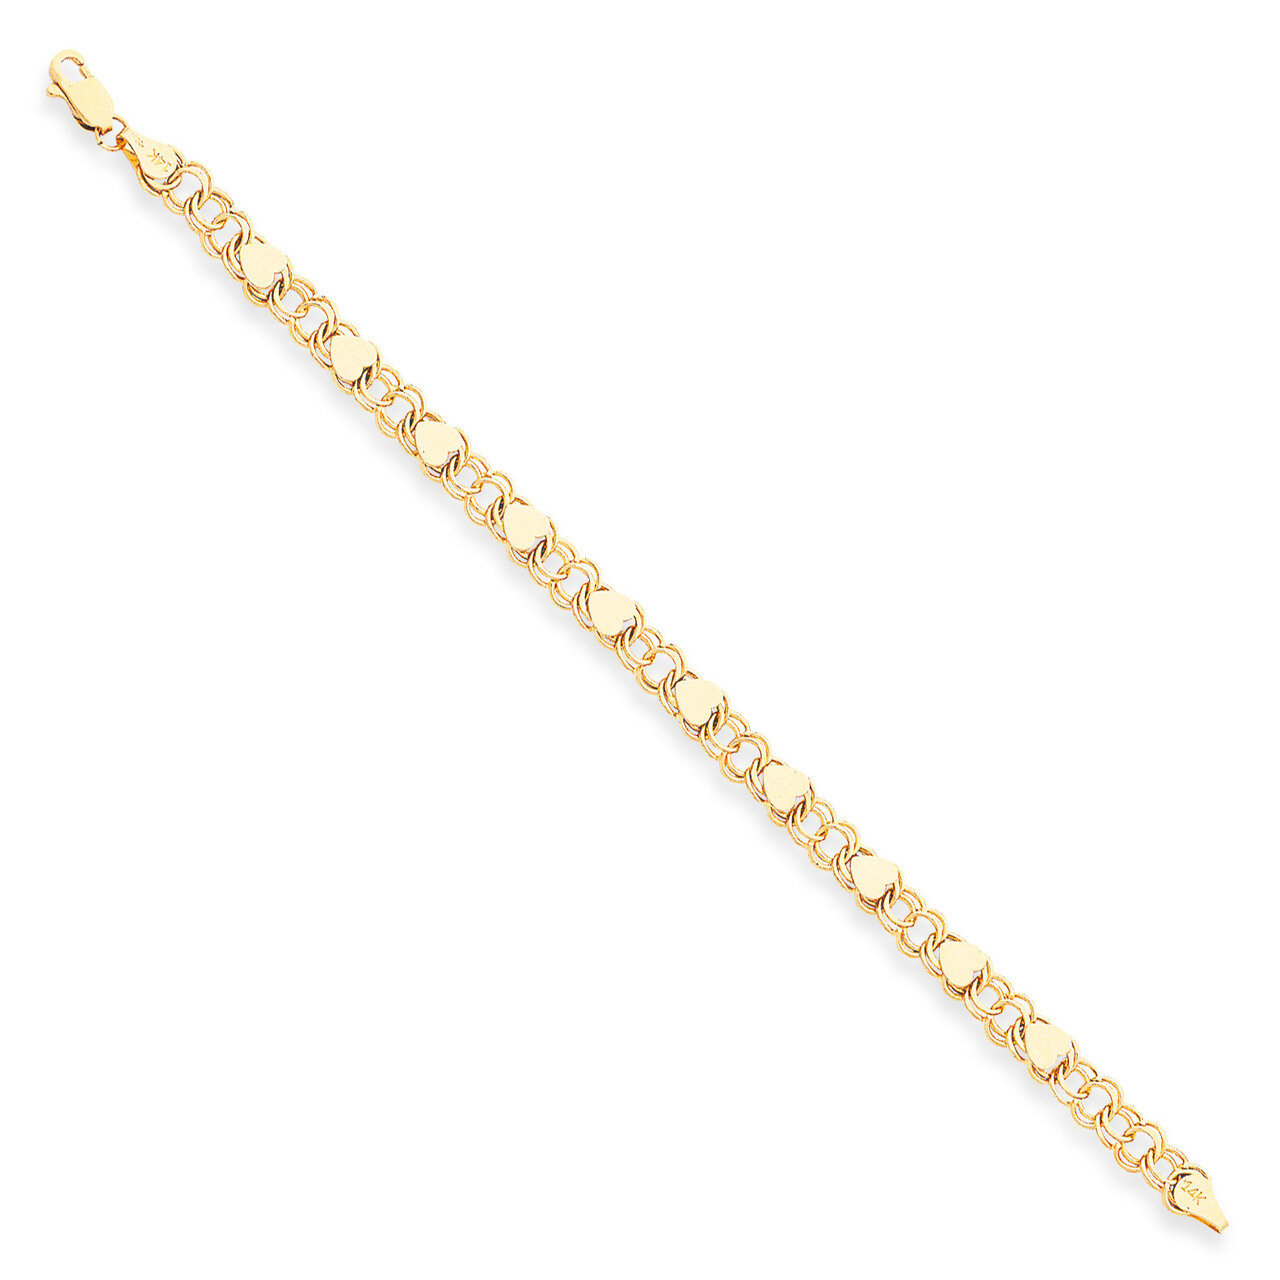 Double Link with Hearts Charm Bracelet 7 Inch 14k Gold DO500-7